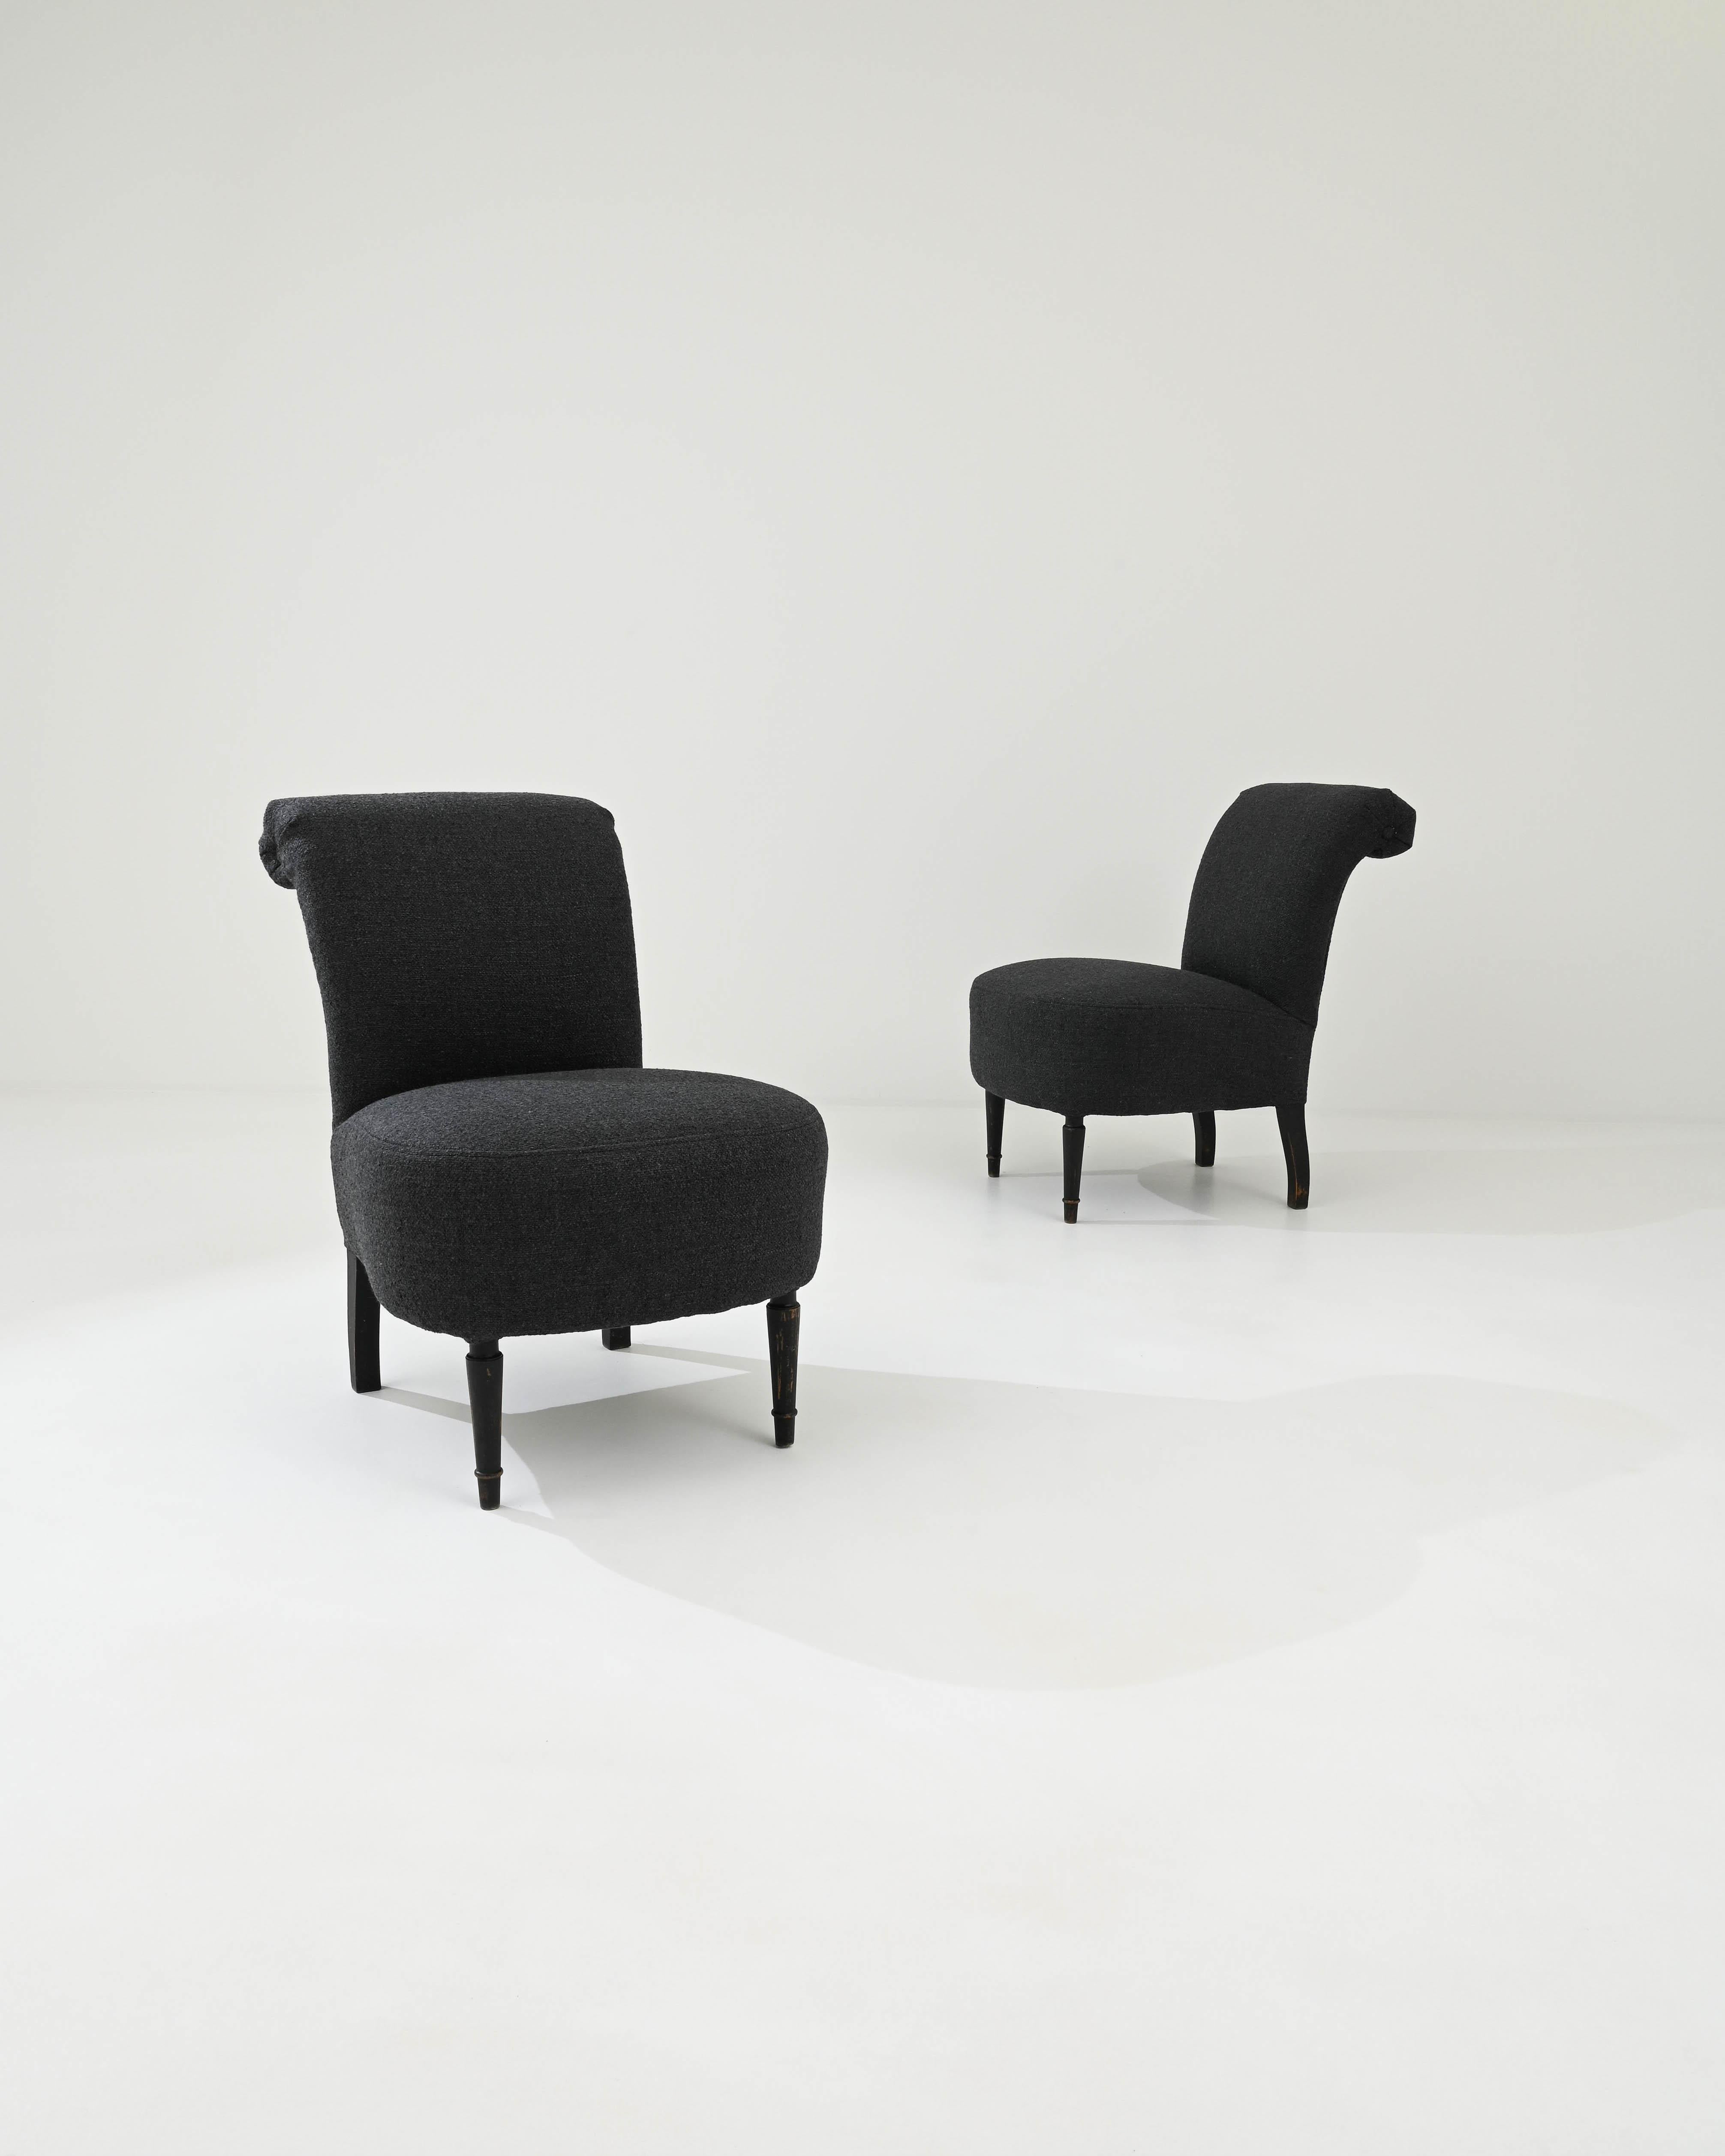 A pair of re-upholstered slipper chairs from France, produced in the 19th Century. Upholstered in a terry blue boucle, cascading up and over the chairs’ arching backs, makes a compelling invitation to comfort. Standing on four black legs, these